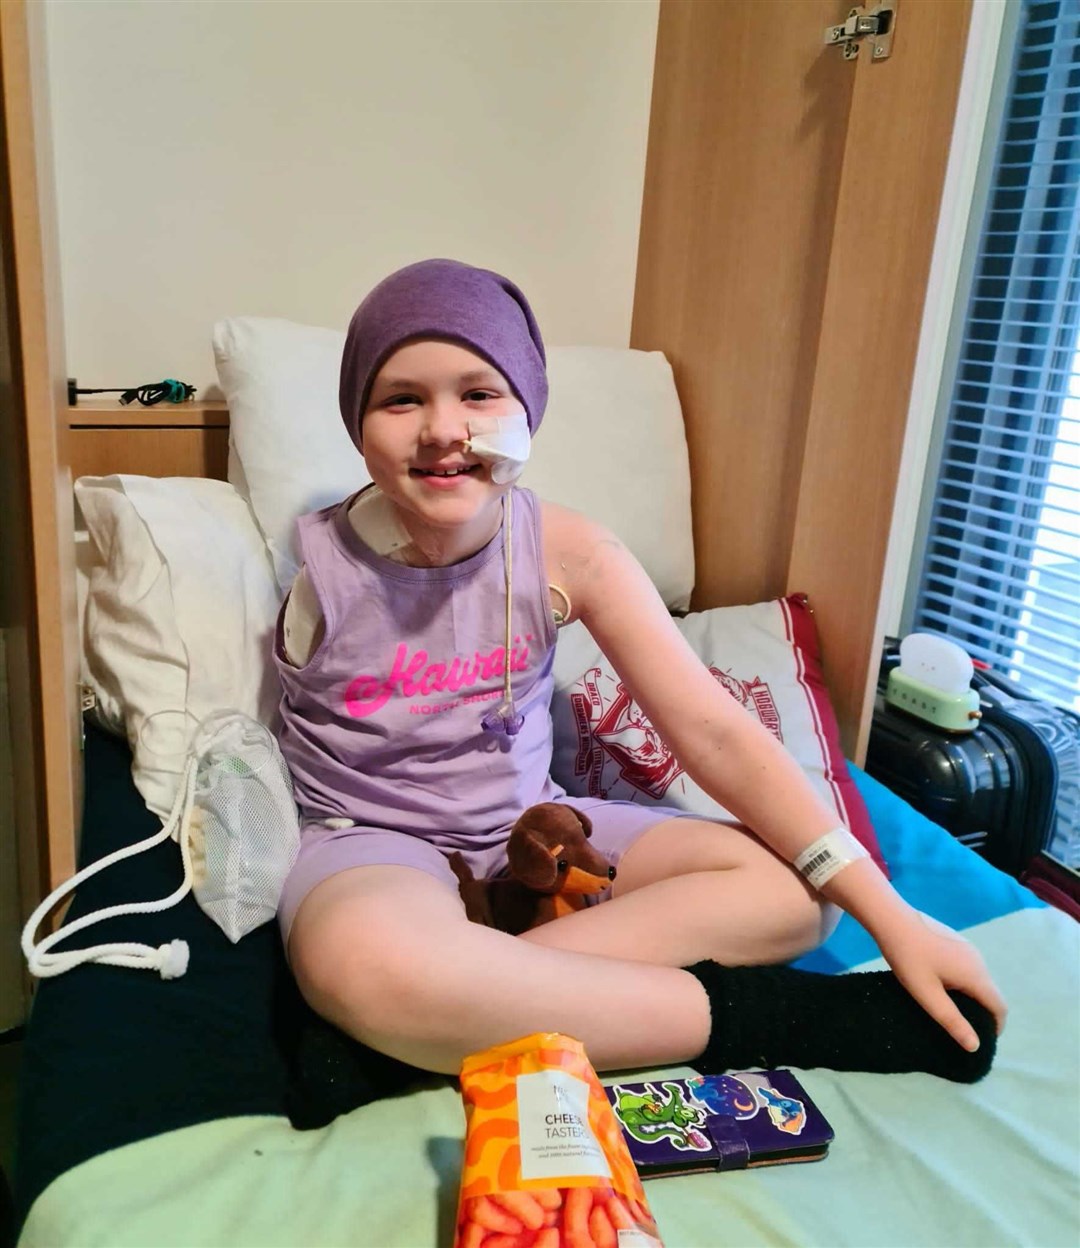 Ailsa Fraser has spent months in hospital and undergone gruelling round of chemotherapy after being diagnosed with a form of bone cancer.